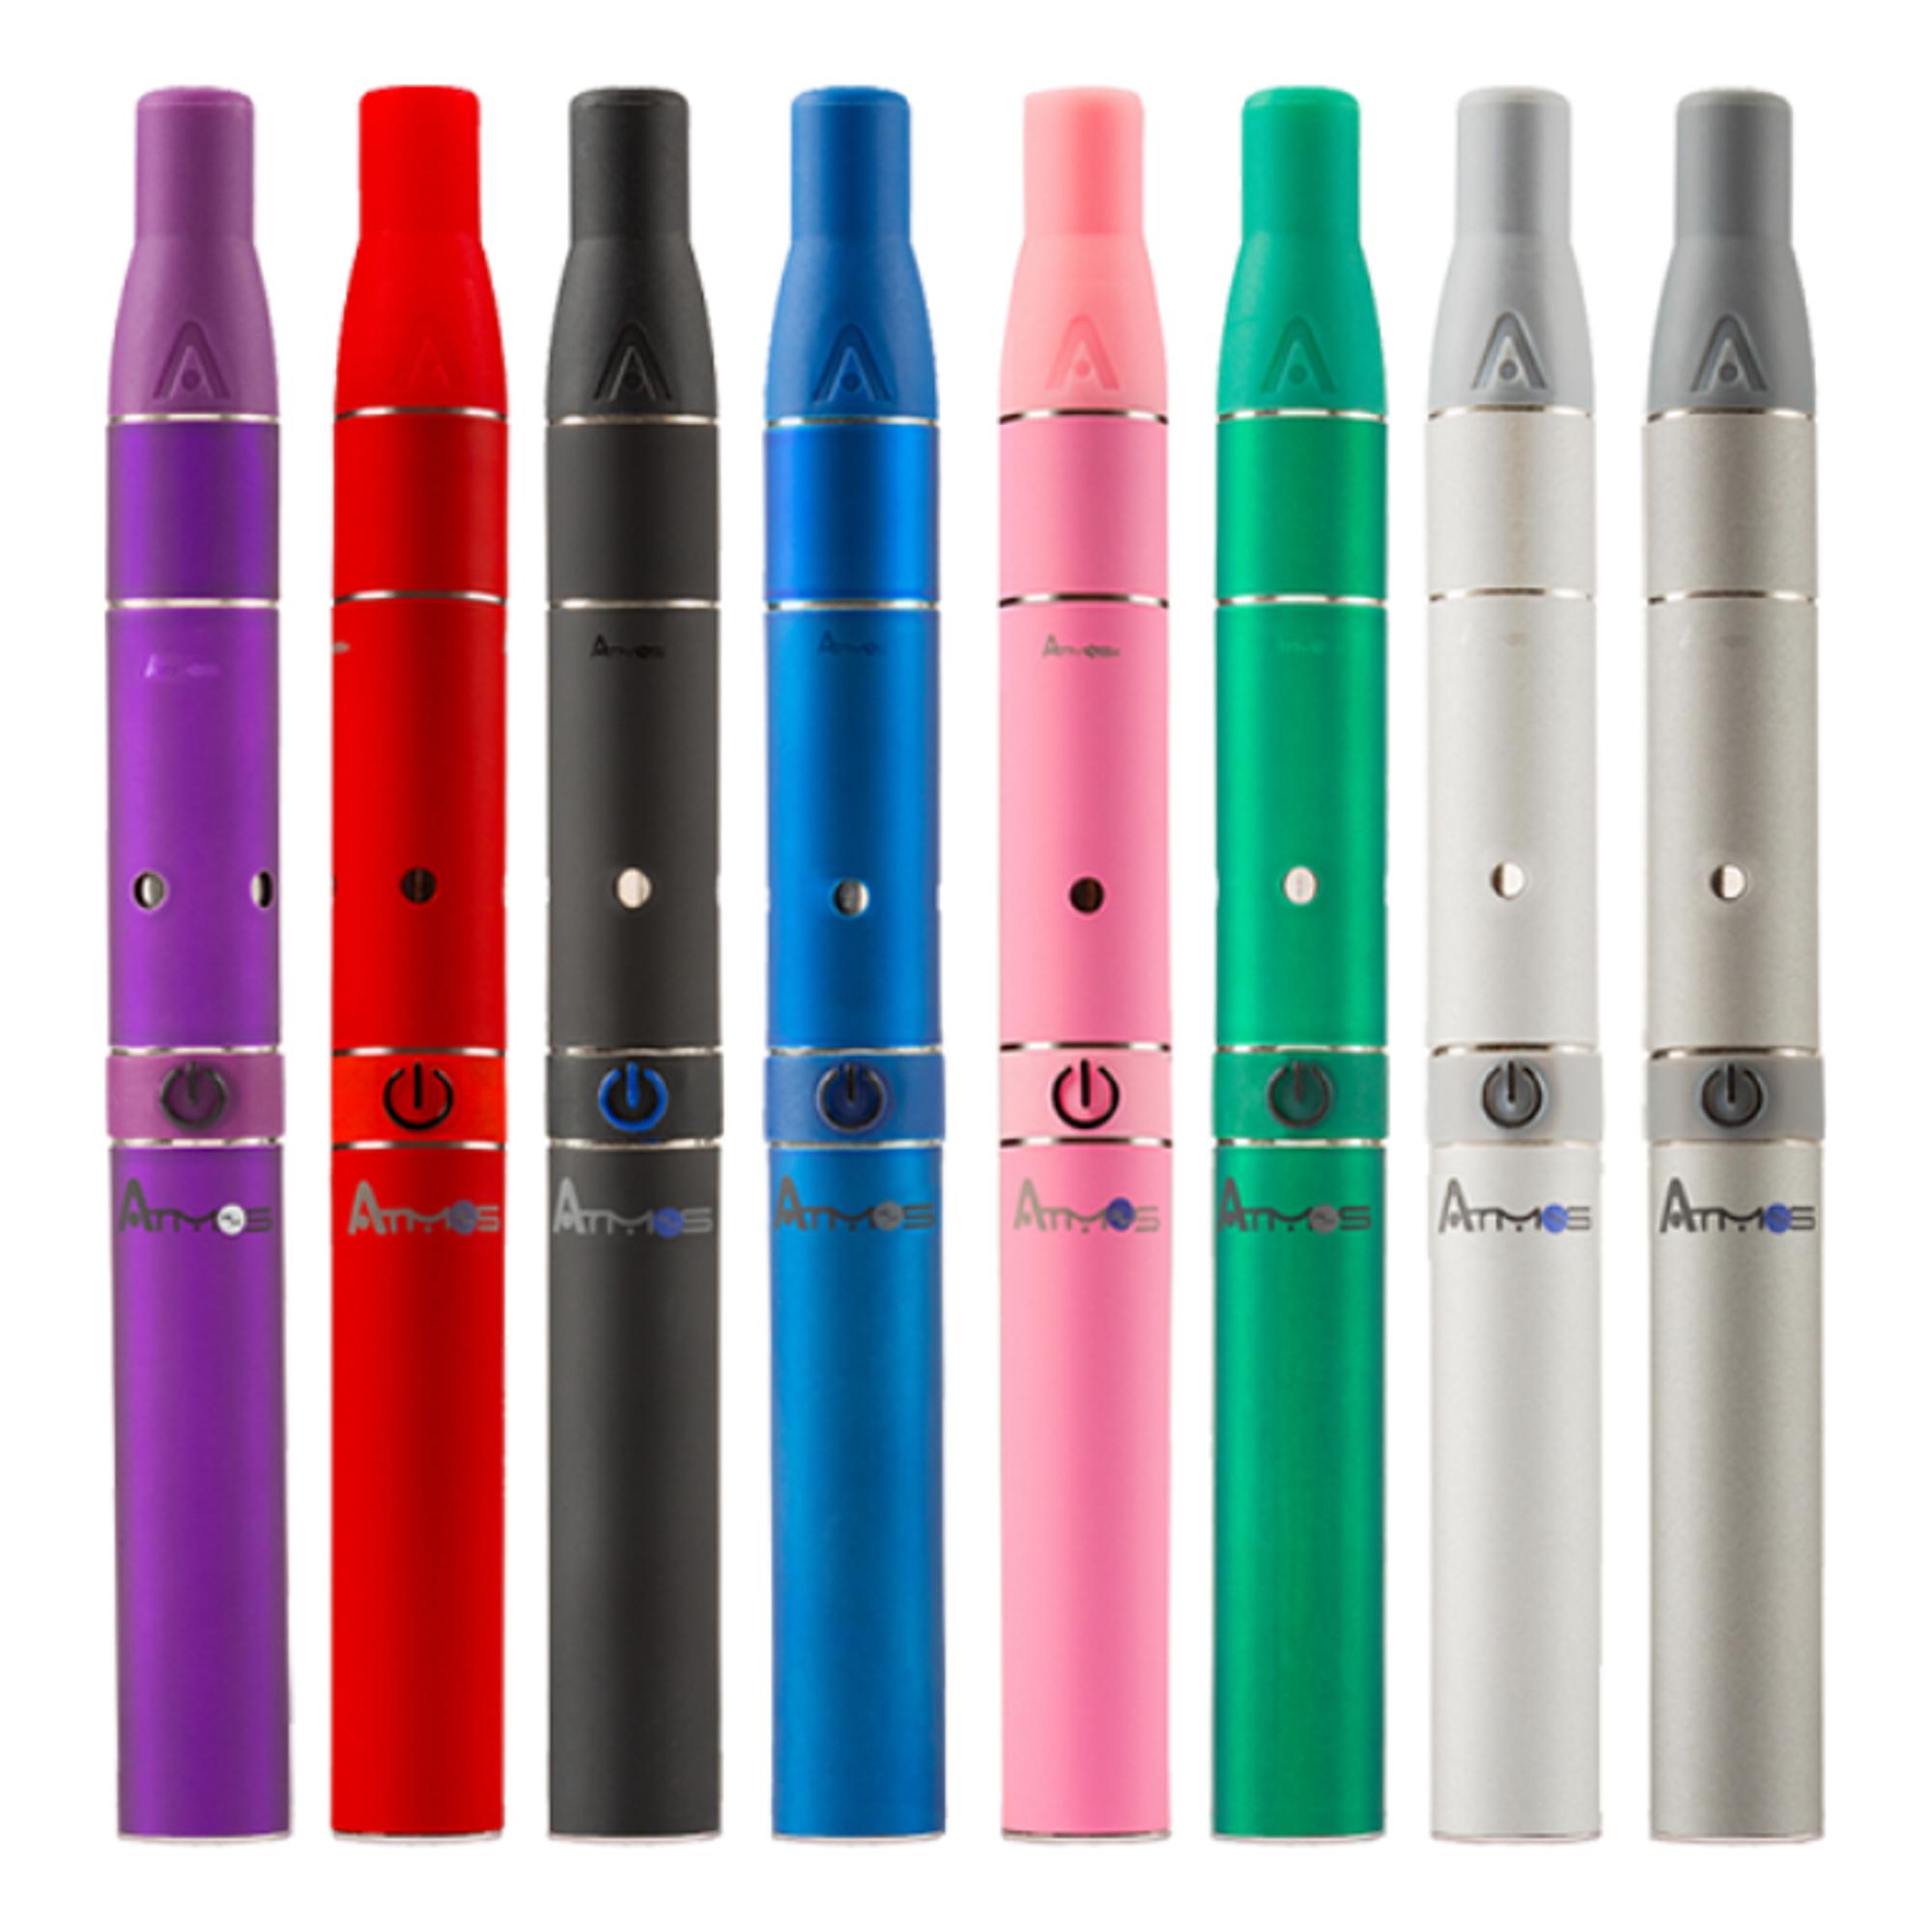 An Introduction to Forced Air Vaporizers & Why They are Pretty Great